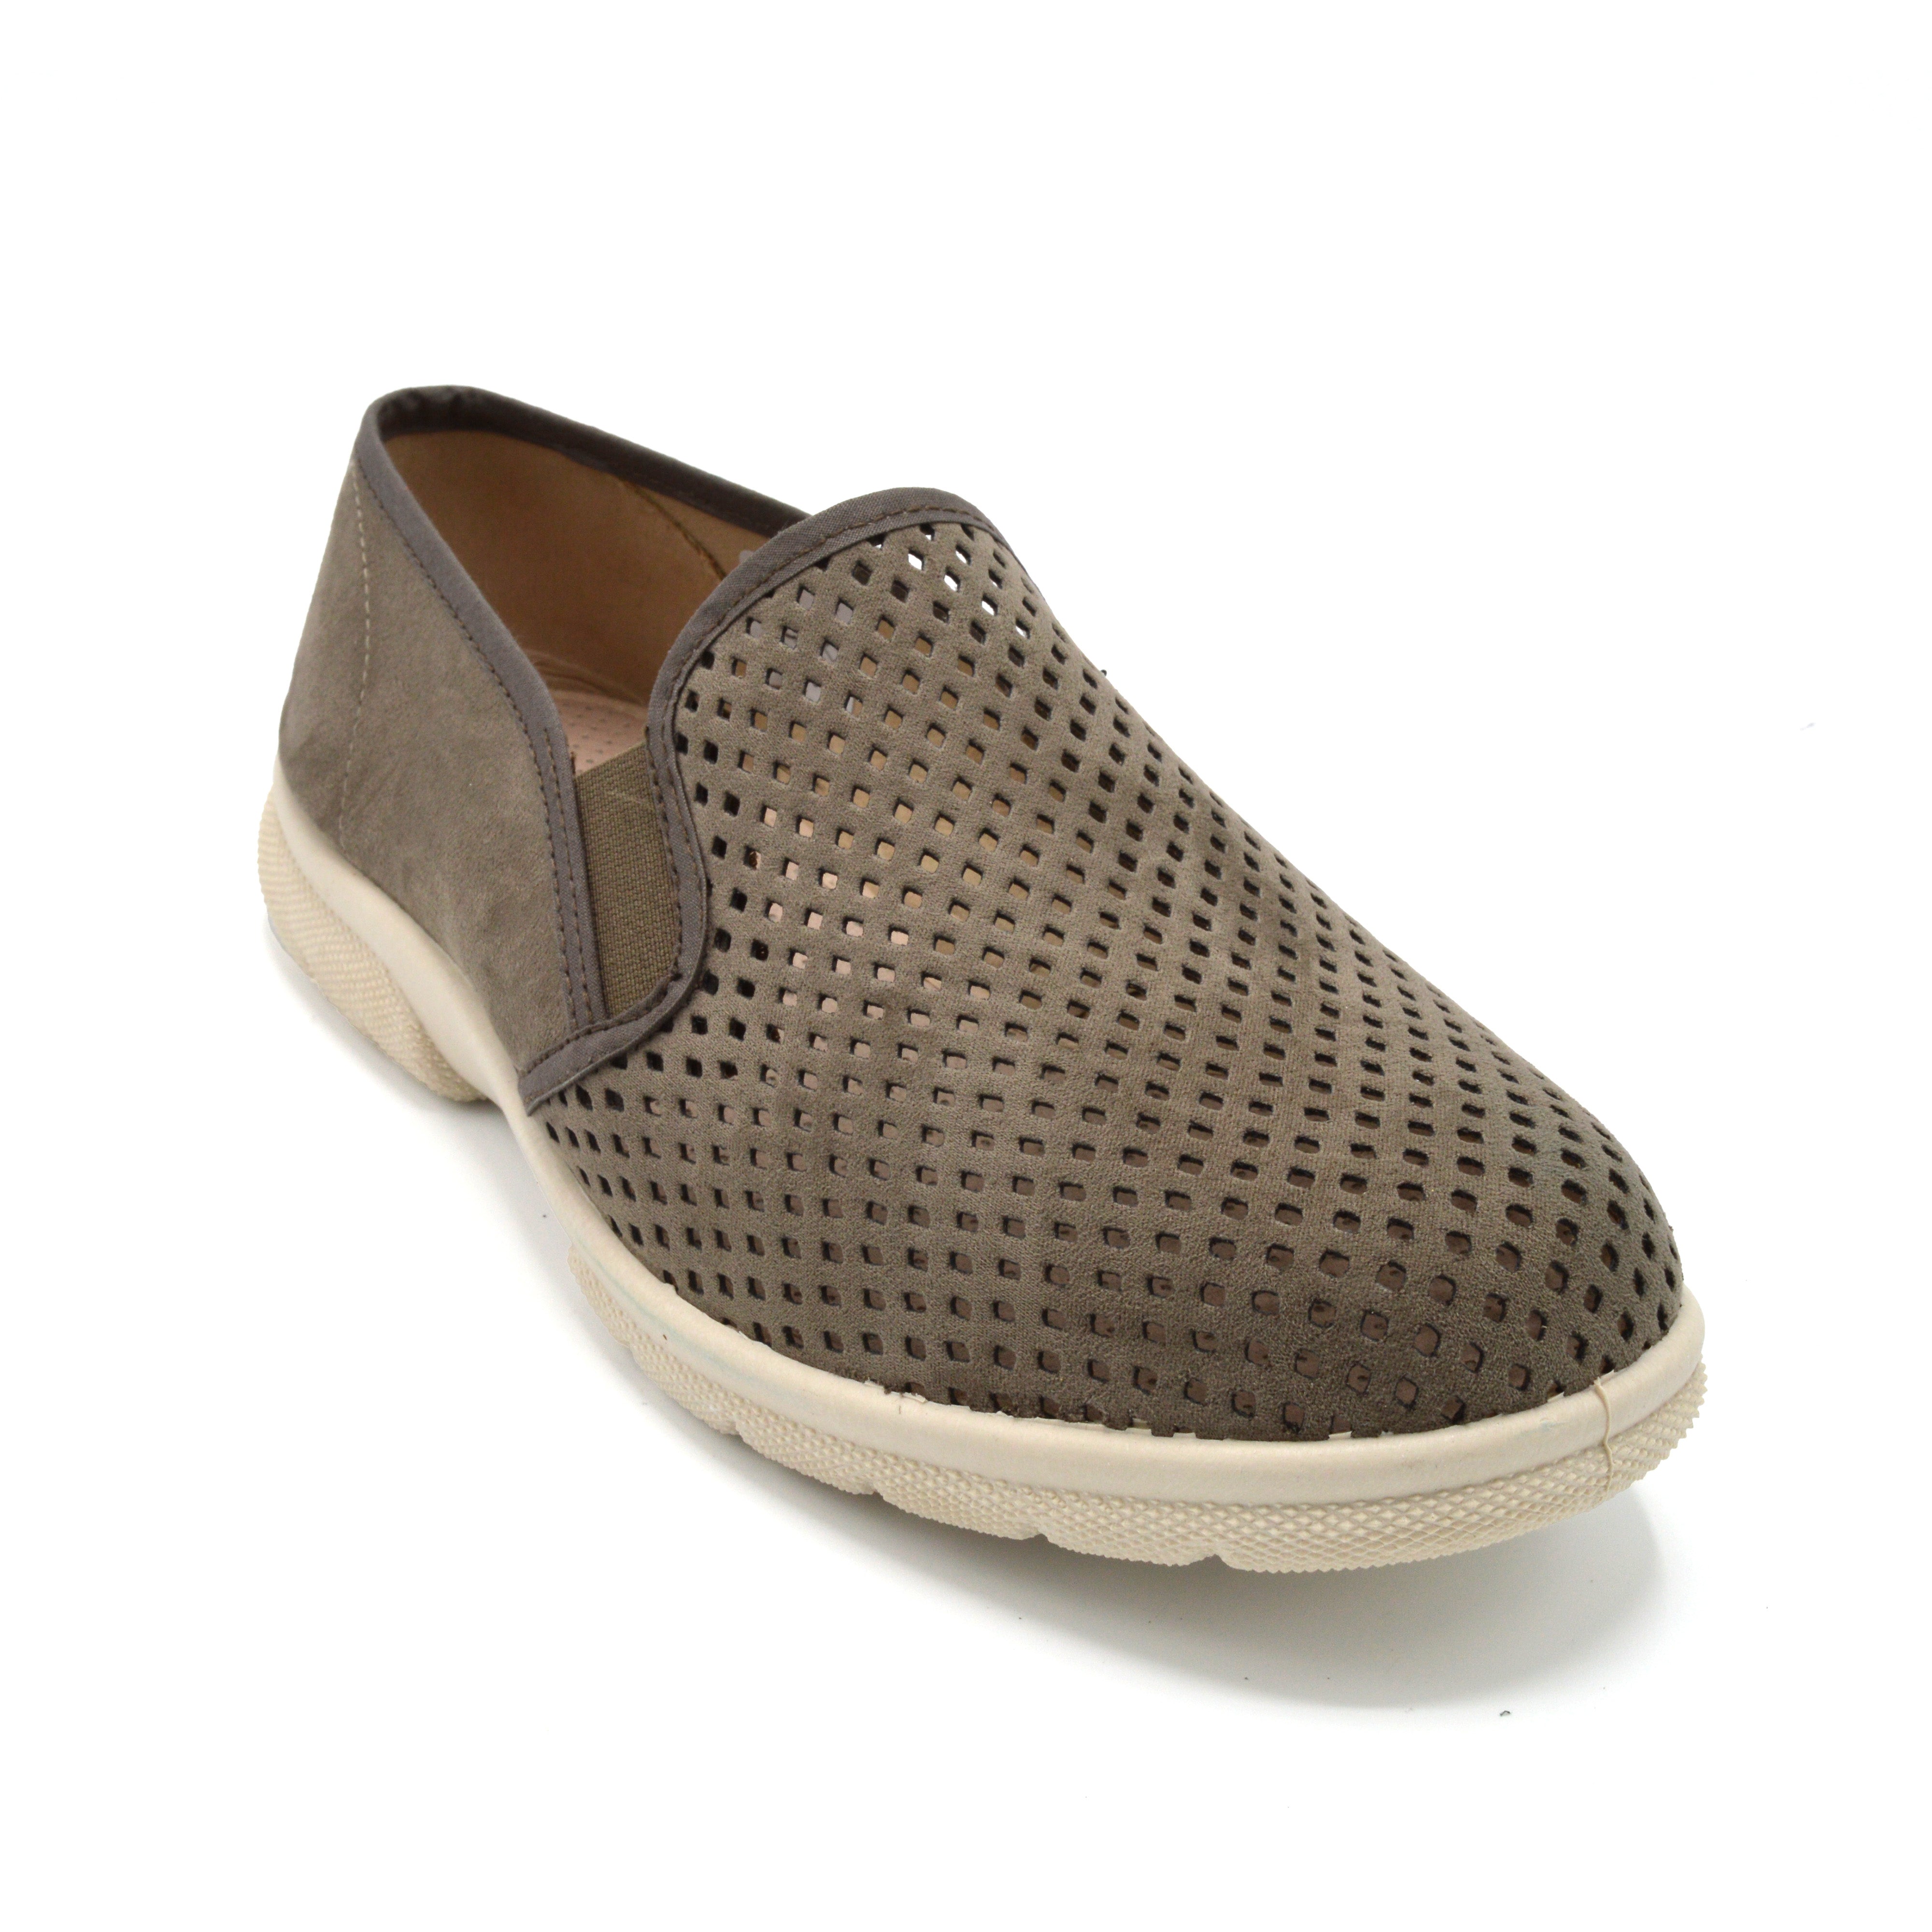 Extra Wide Slip On Suede Shoe For Orthotics